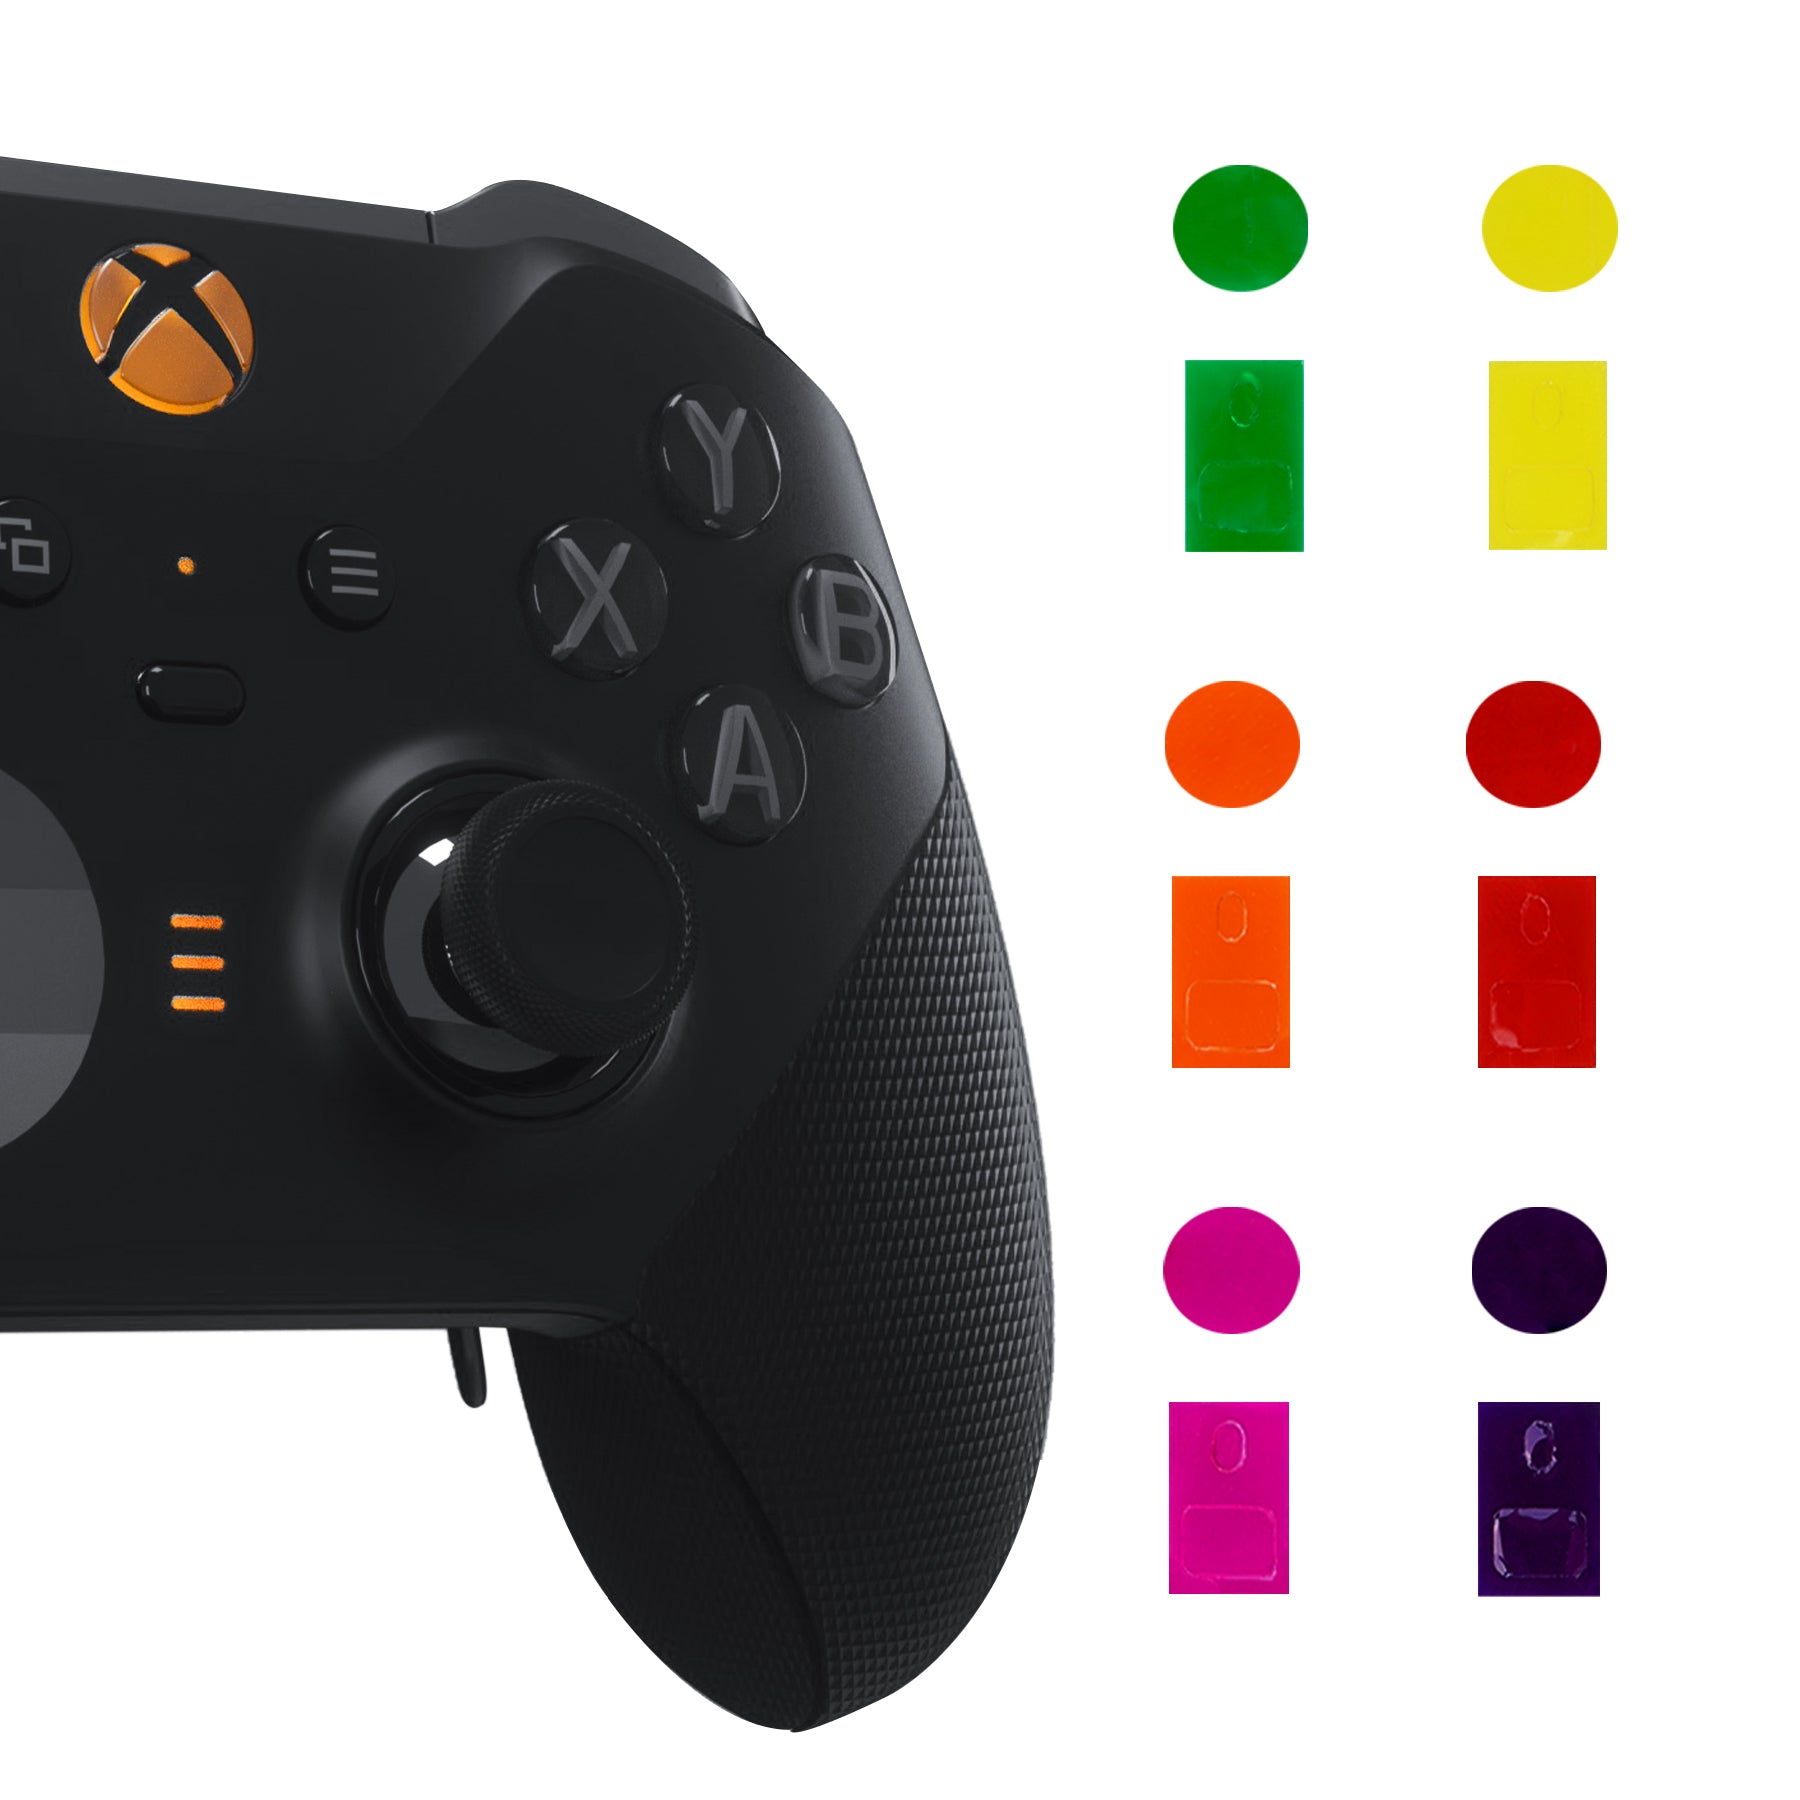 How to Change the Xbox Button Color on the Elite Series 2 Controller